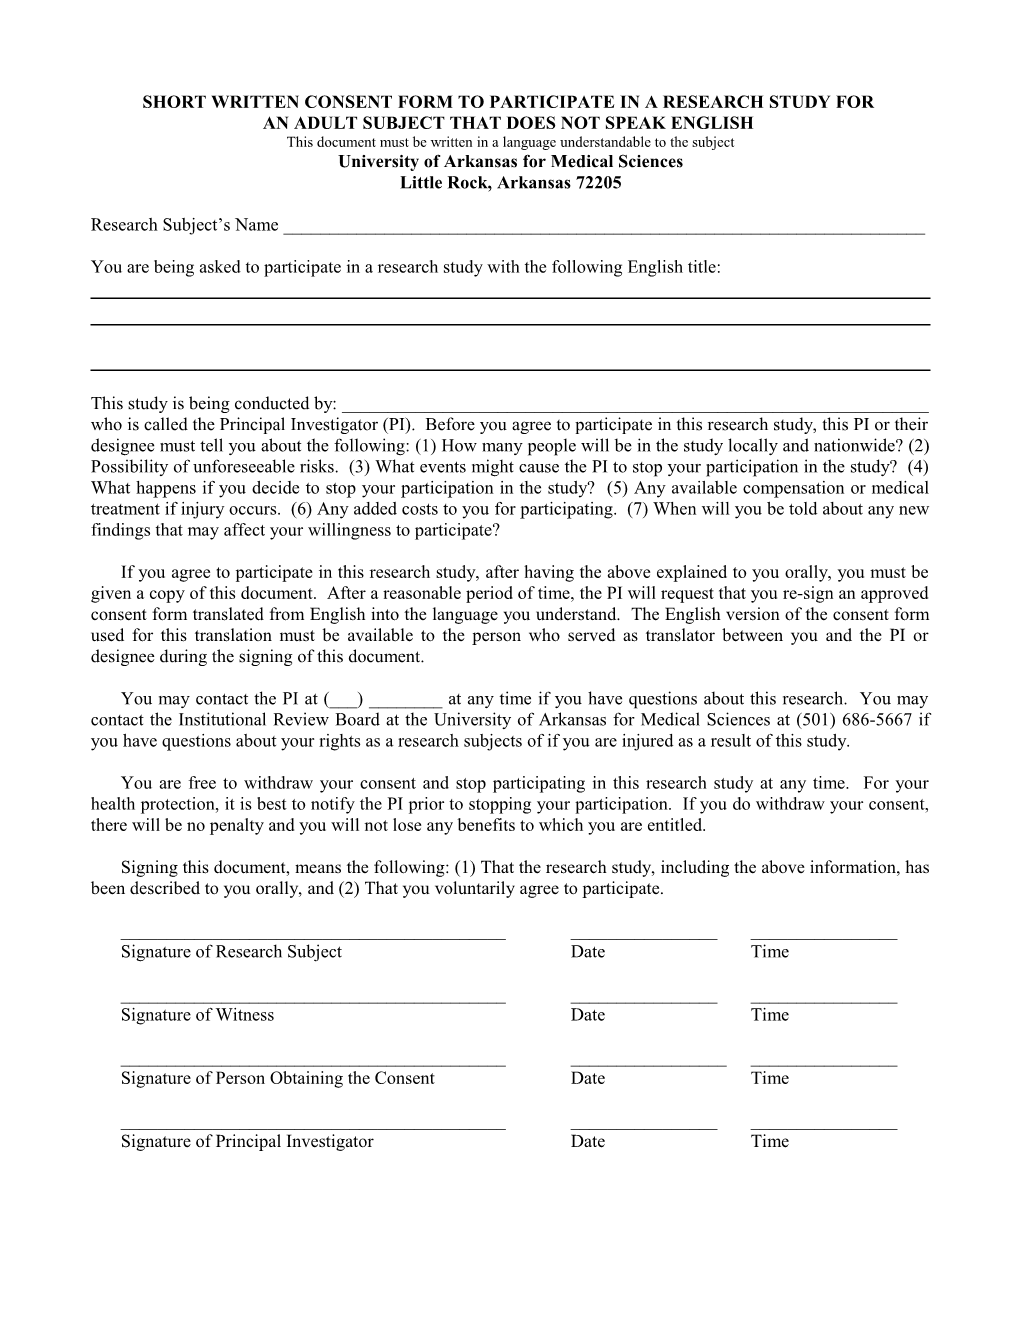 Short Written Consent Form to Participate in a Research Study for An